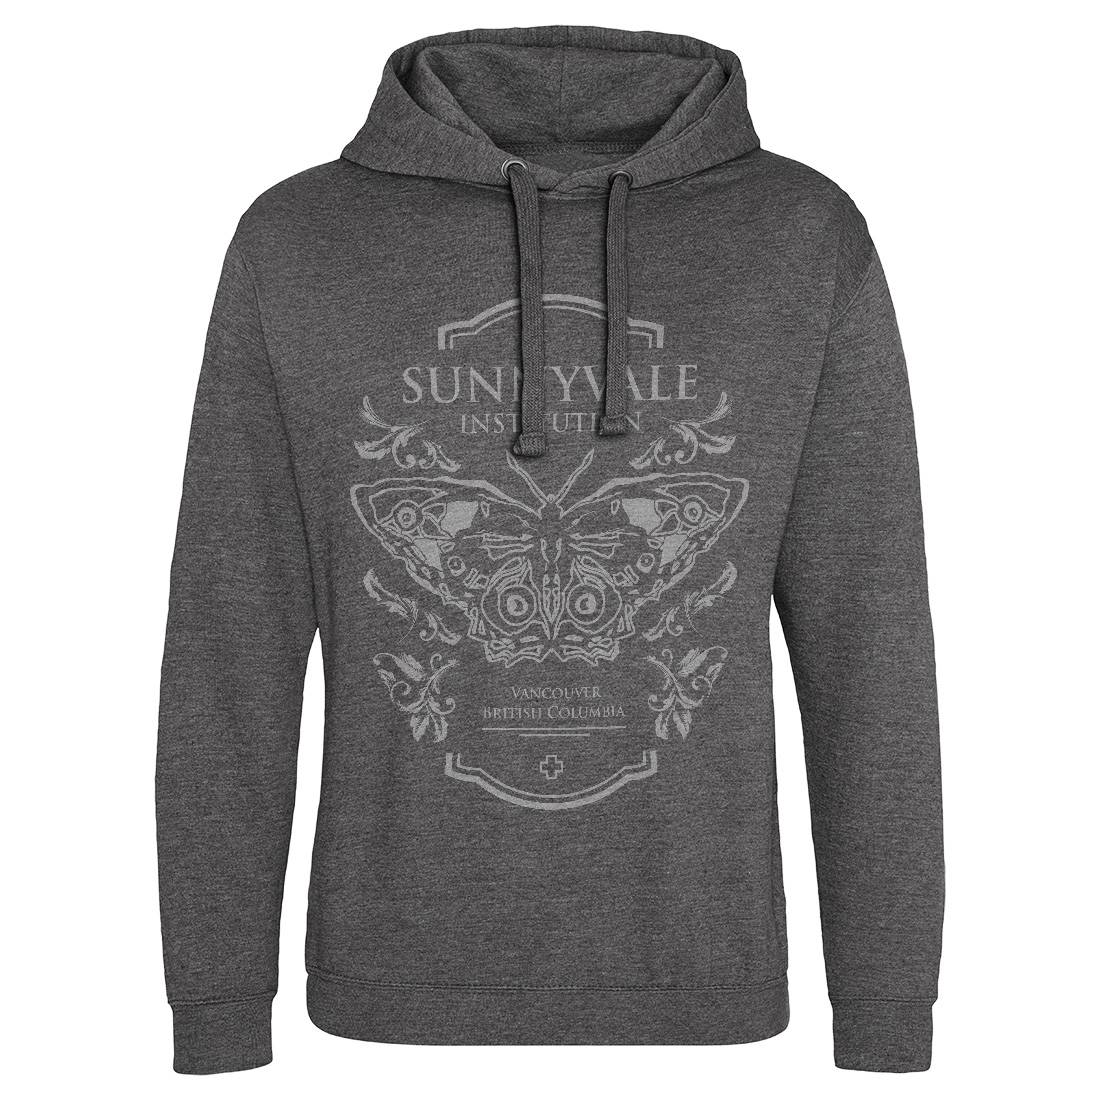 Sunnyvale Institution Mens Hoodie Without Pocket Space D232